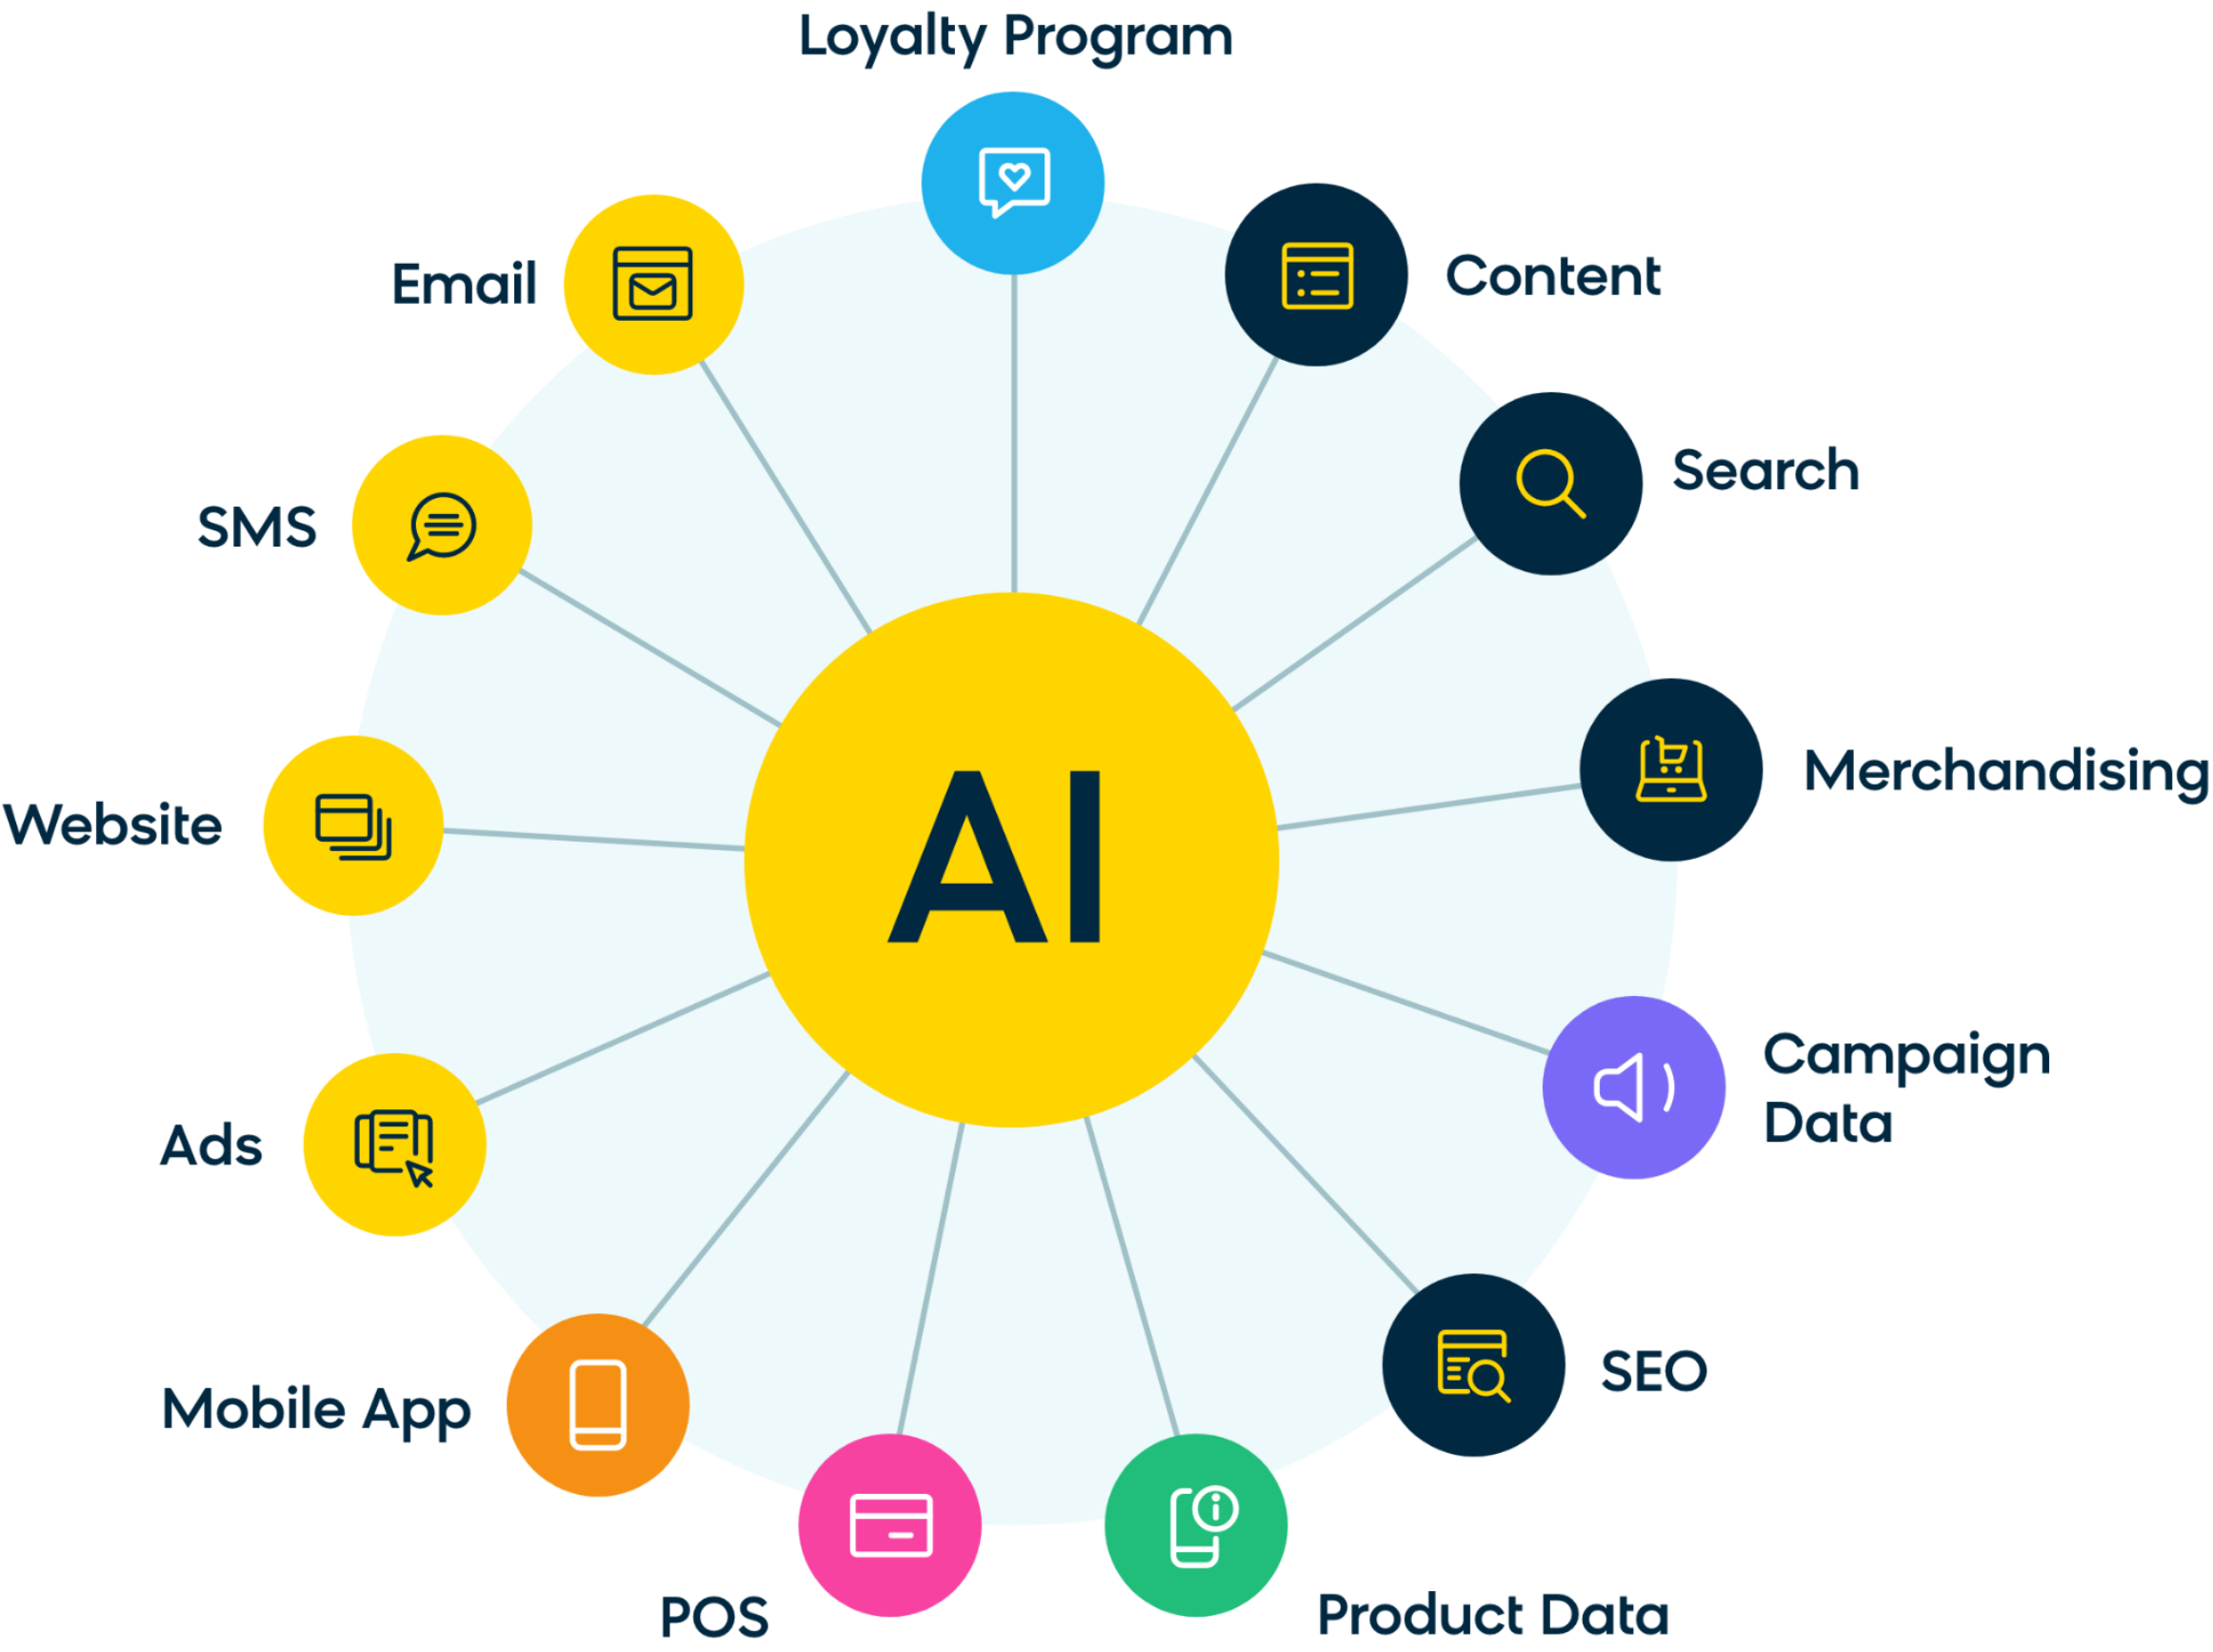 All the e-commerce channels that AI can improve or optimize